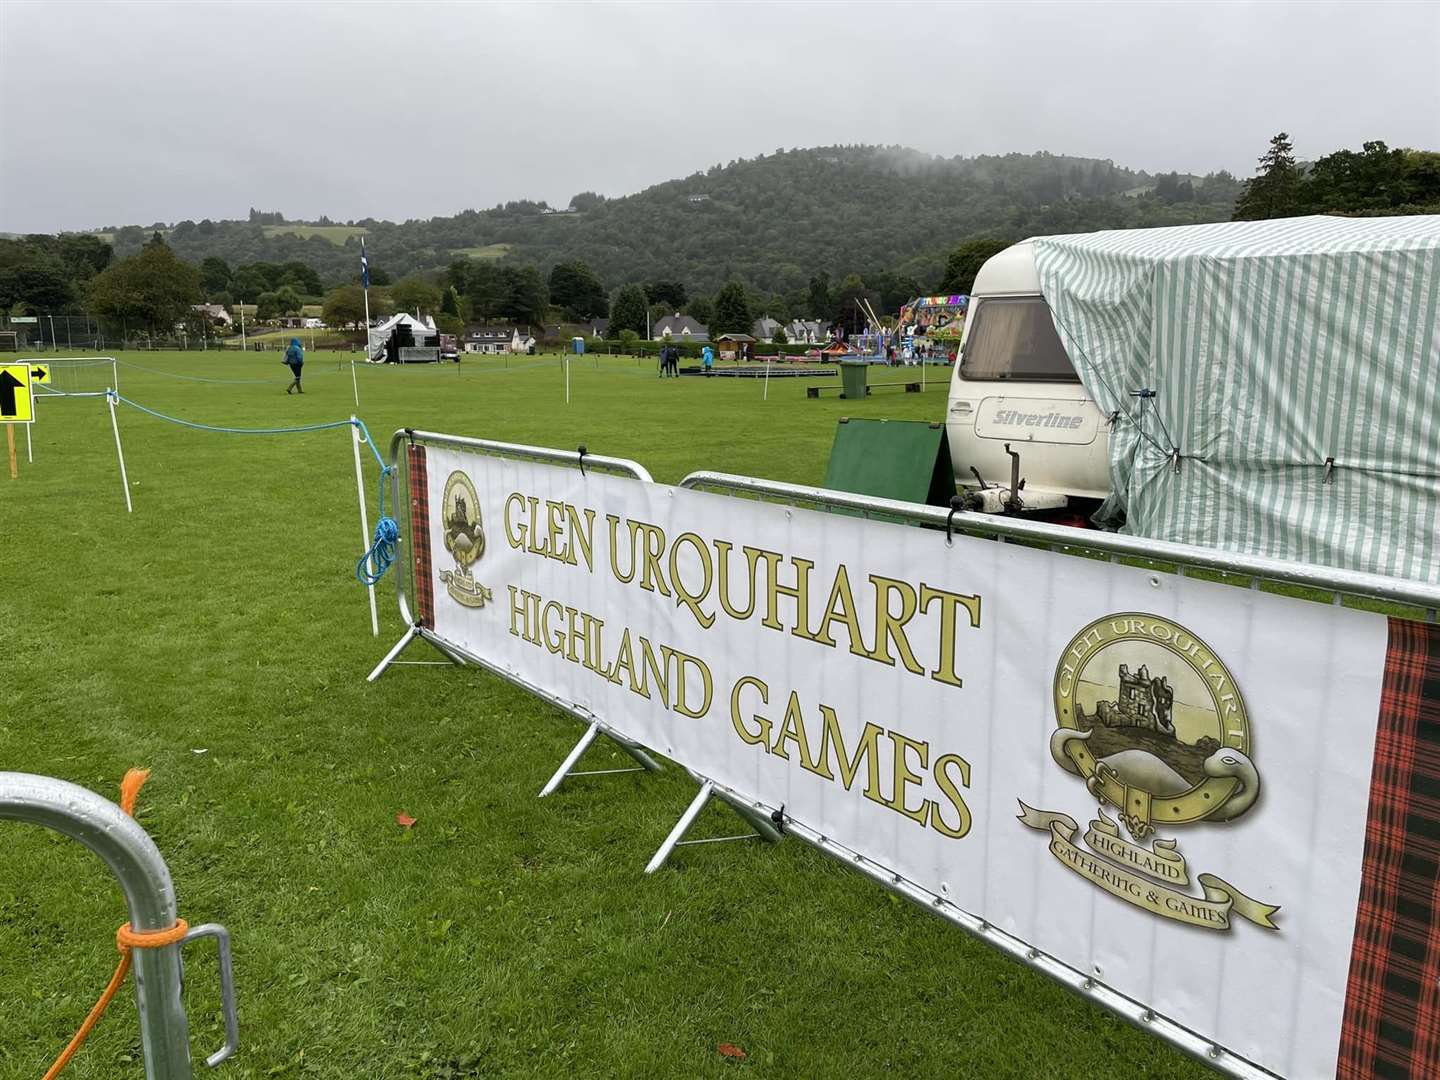 Organisers of the Glen Urquhart Highland Games have announced the last minute cancellation of most of today's planned events.